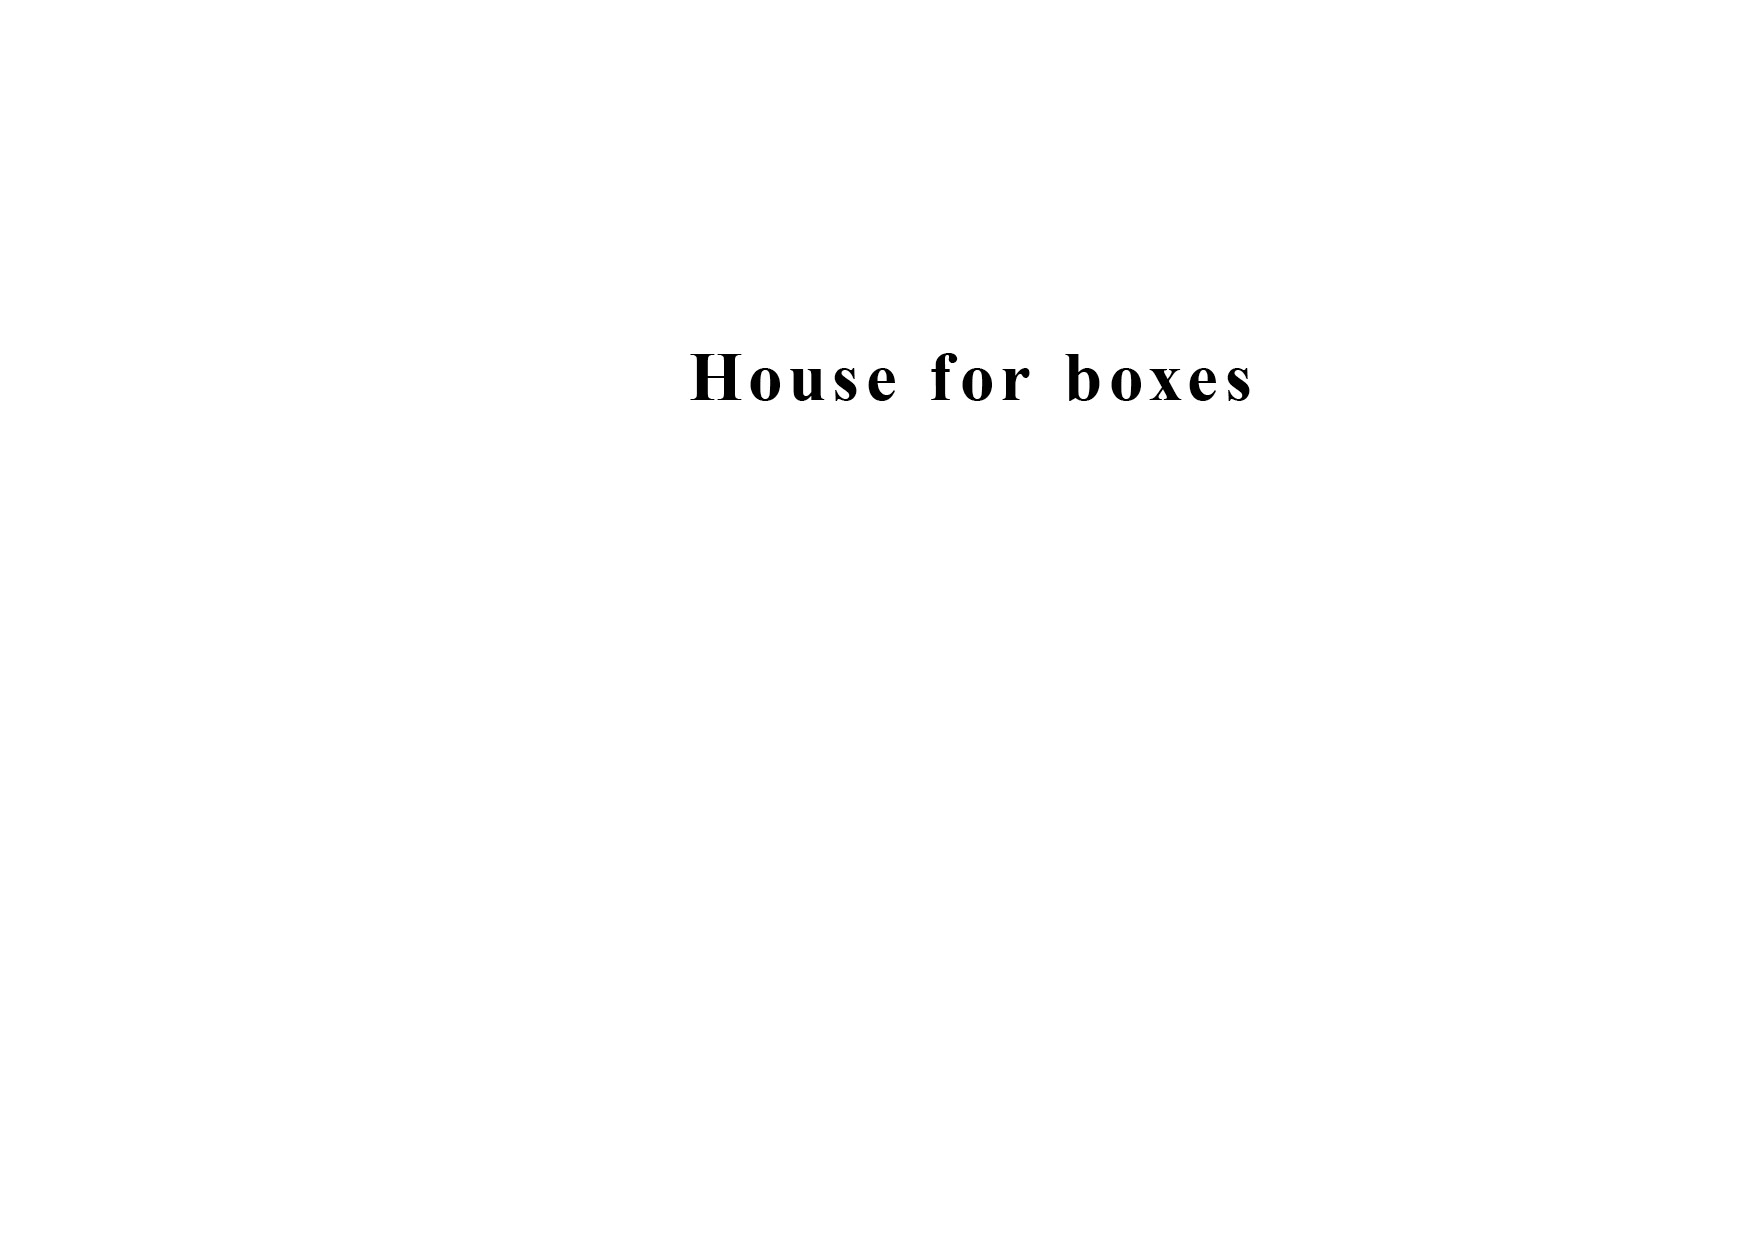 AFTERPOSTOFFICEのhouseforboxesという本の画像